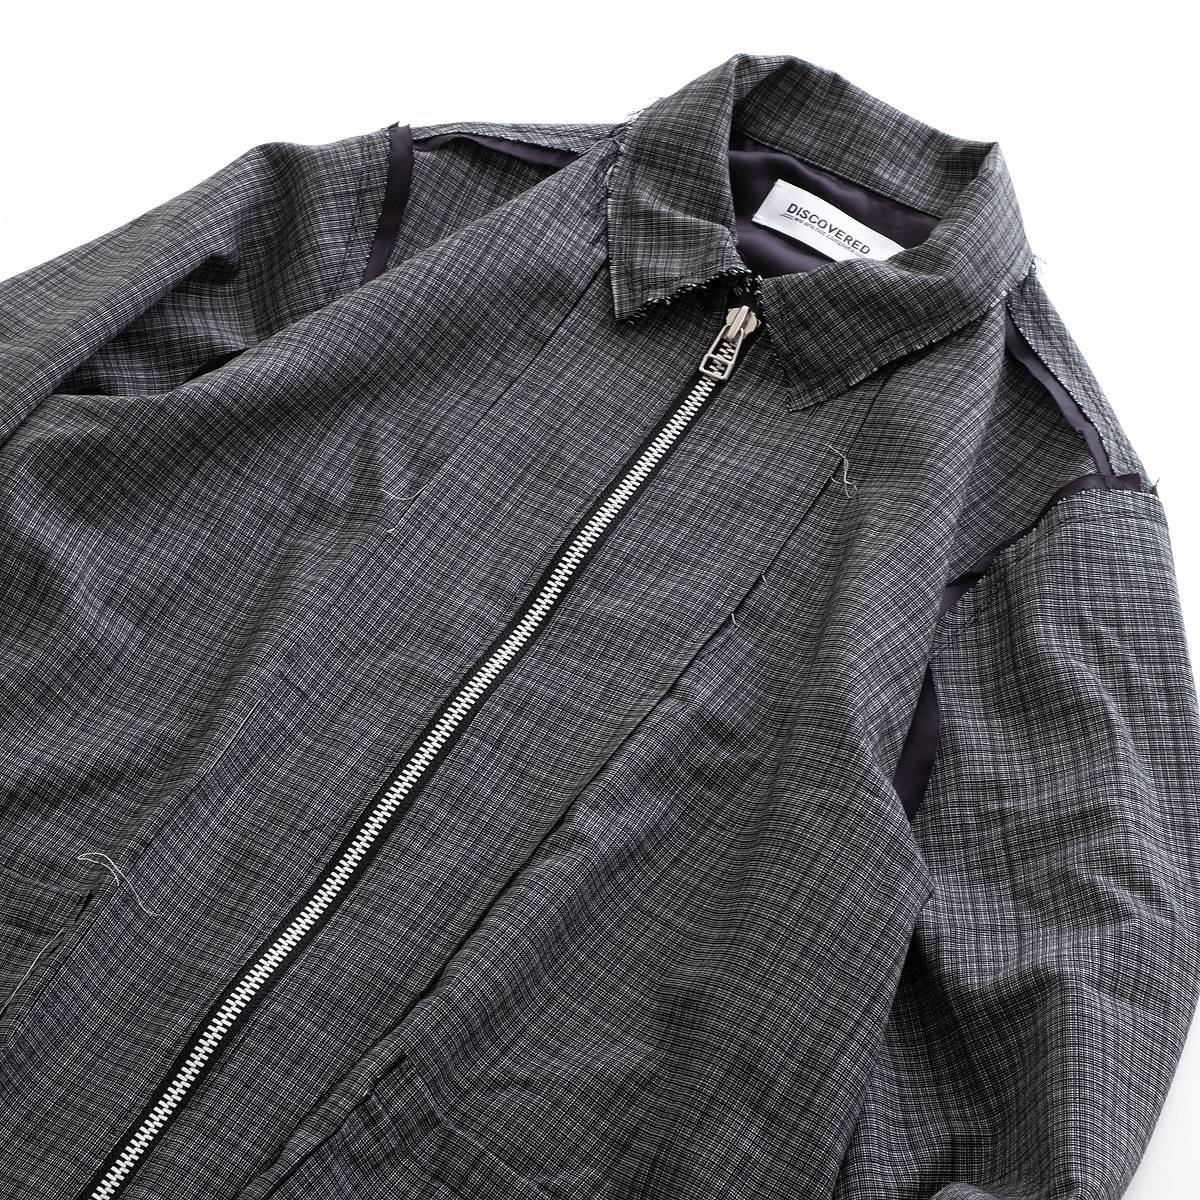 DISCOVERED 50' WOVEN ZIP UP BLOUSON